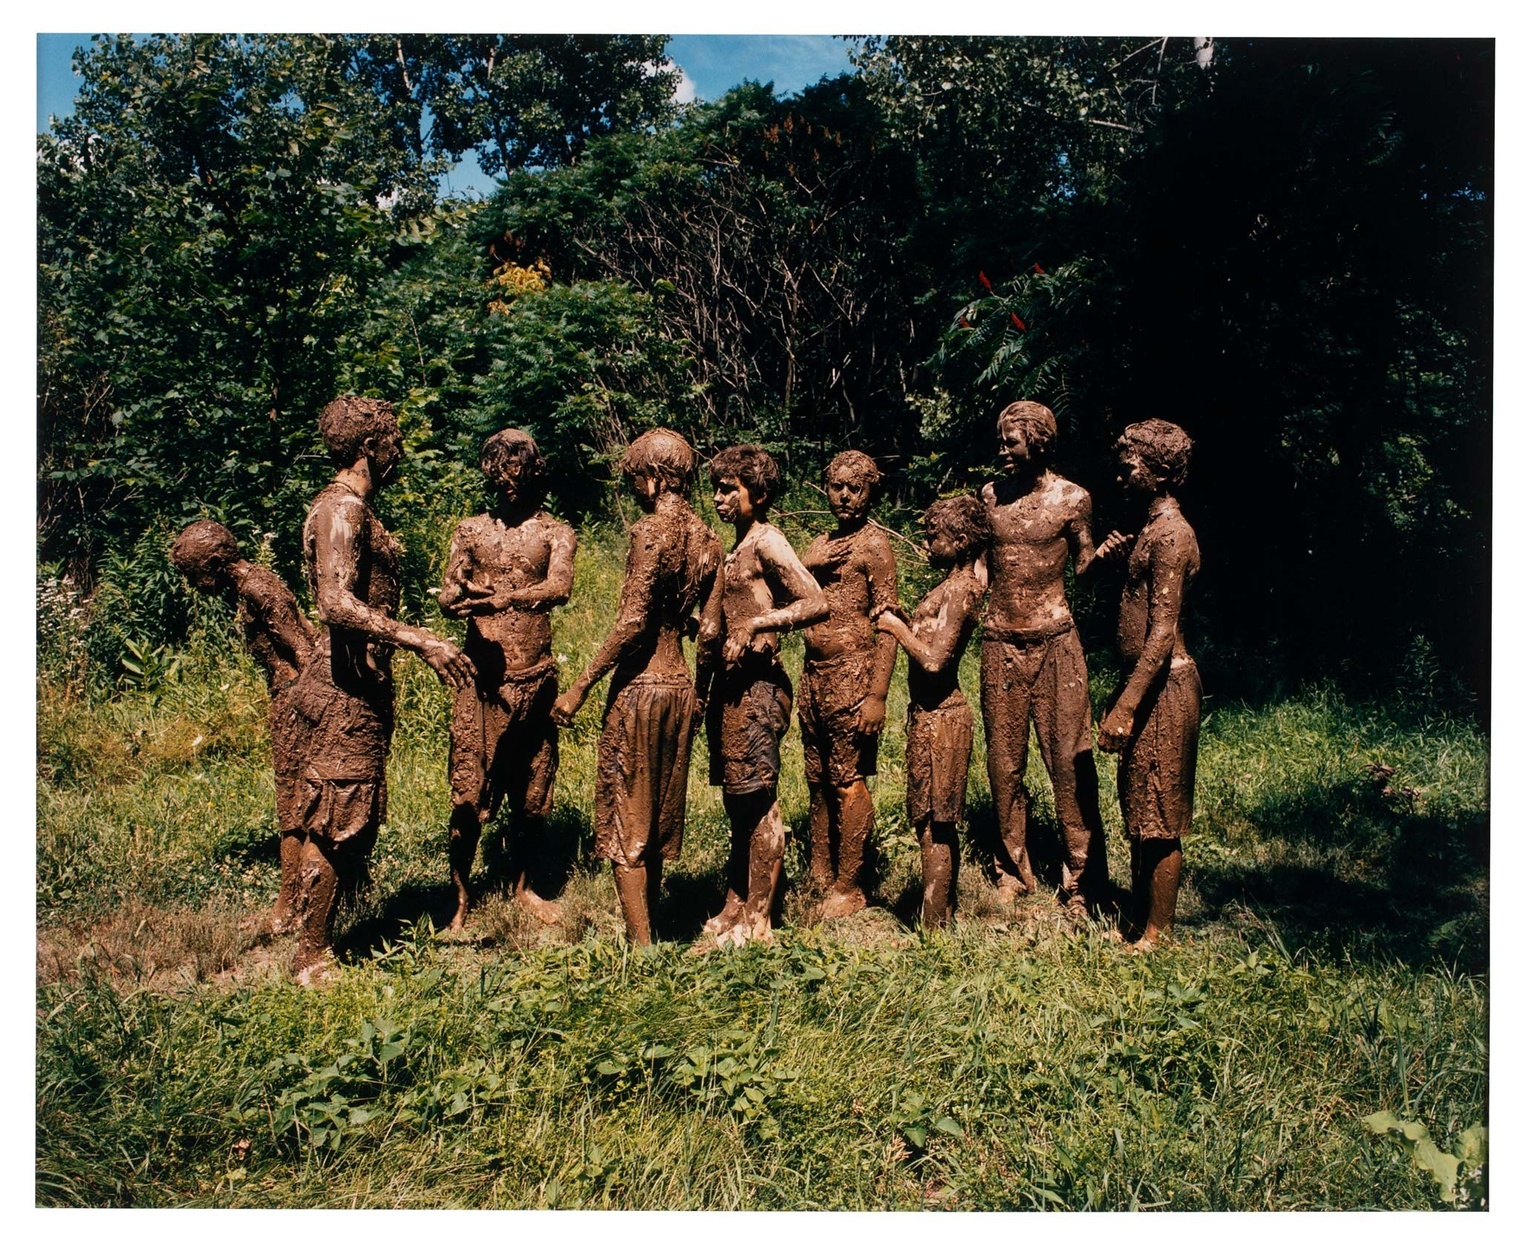 Nine mud-covered boys stand in a line on grass with lush trees in the background.